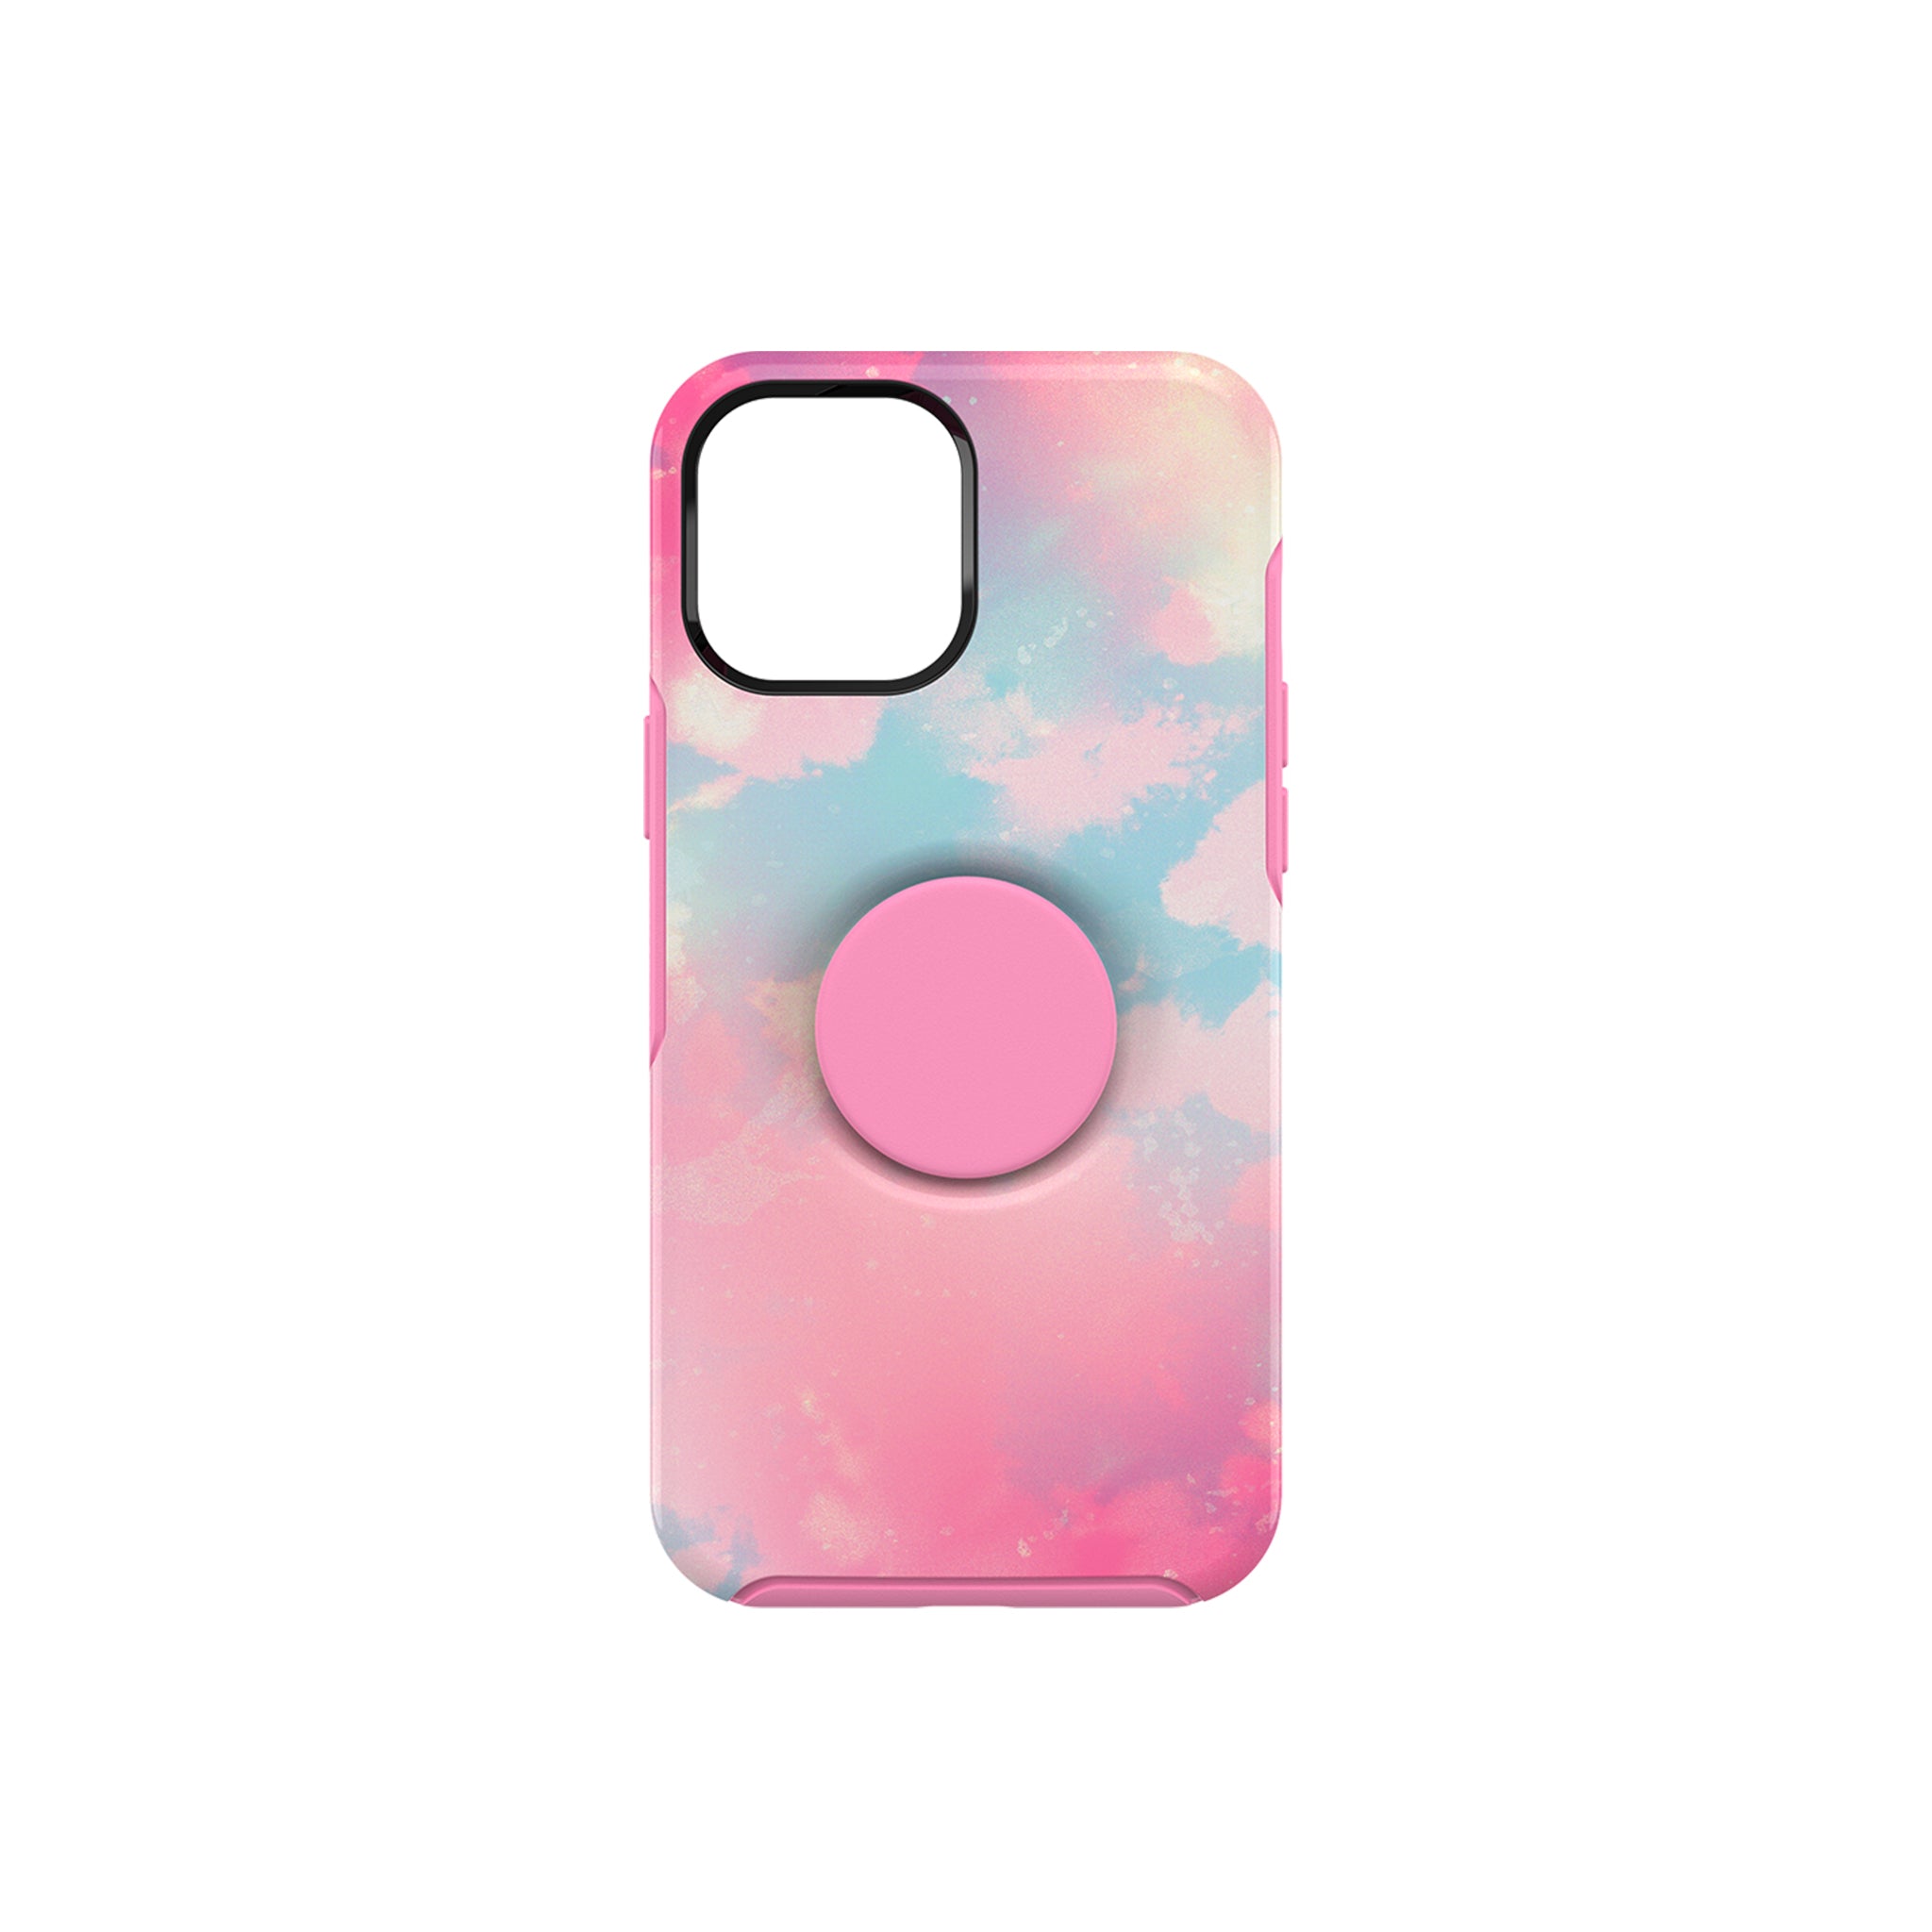 OtterBox - Otter + Pop Symmetry for Iphone 12 Pro Max - DAYDREAMER